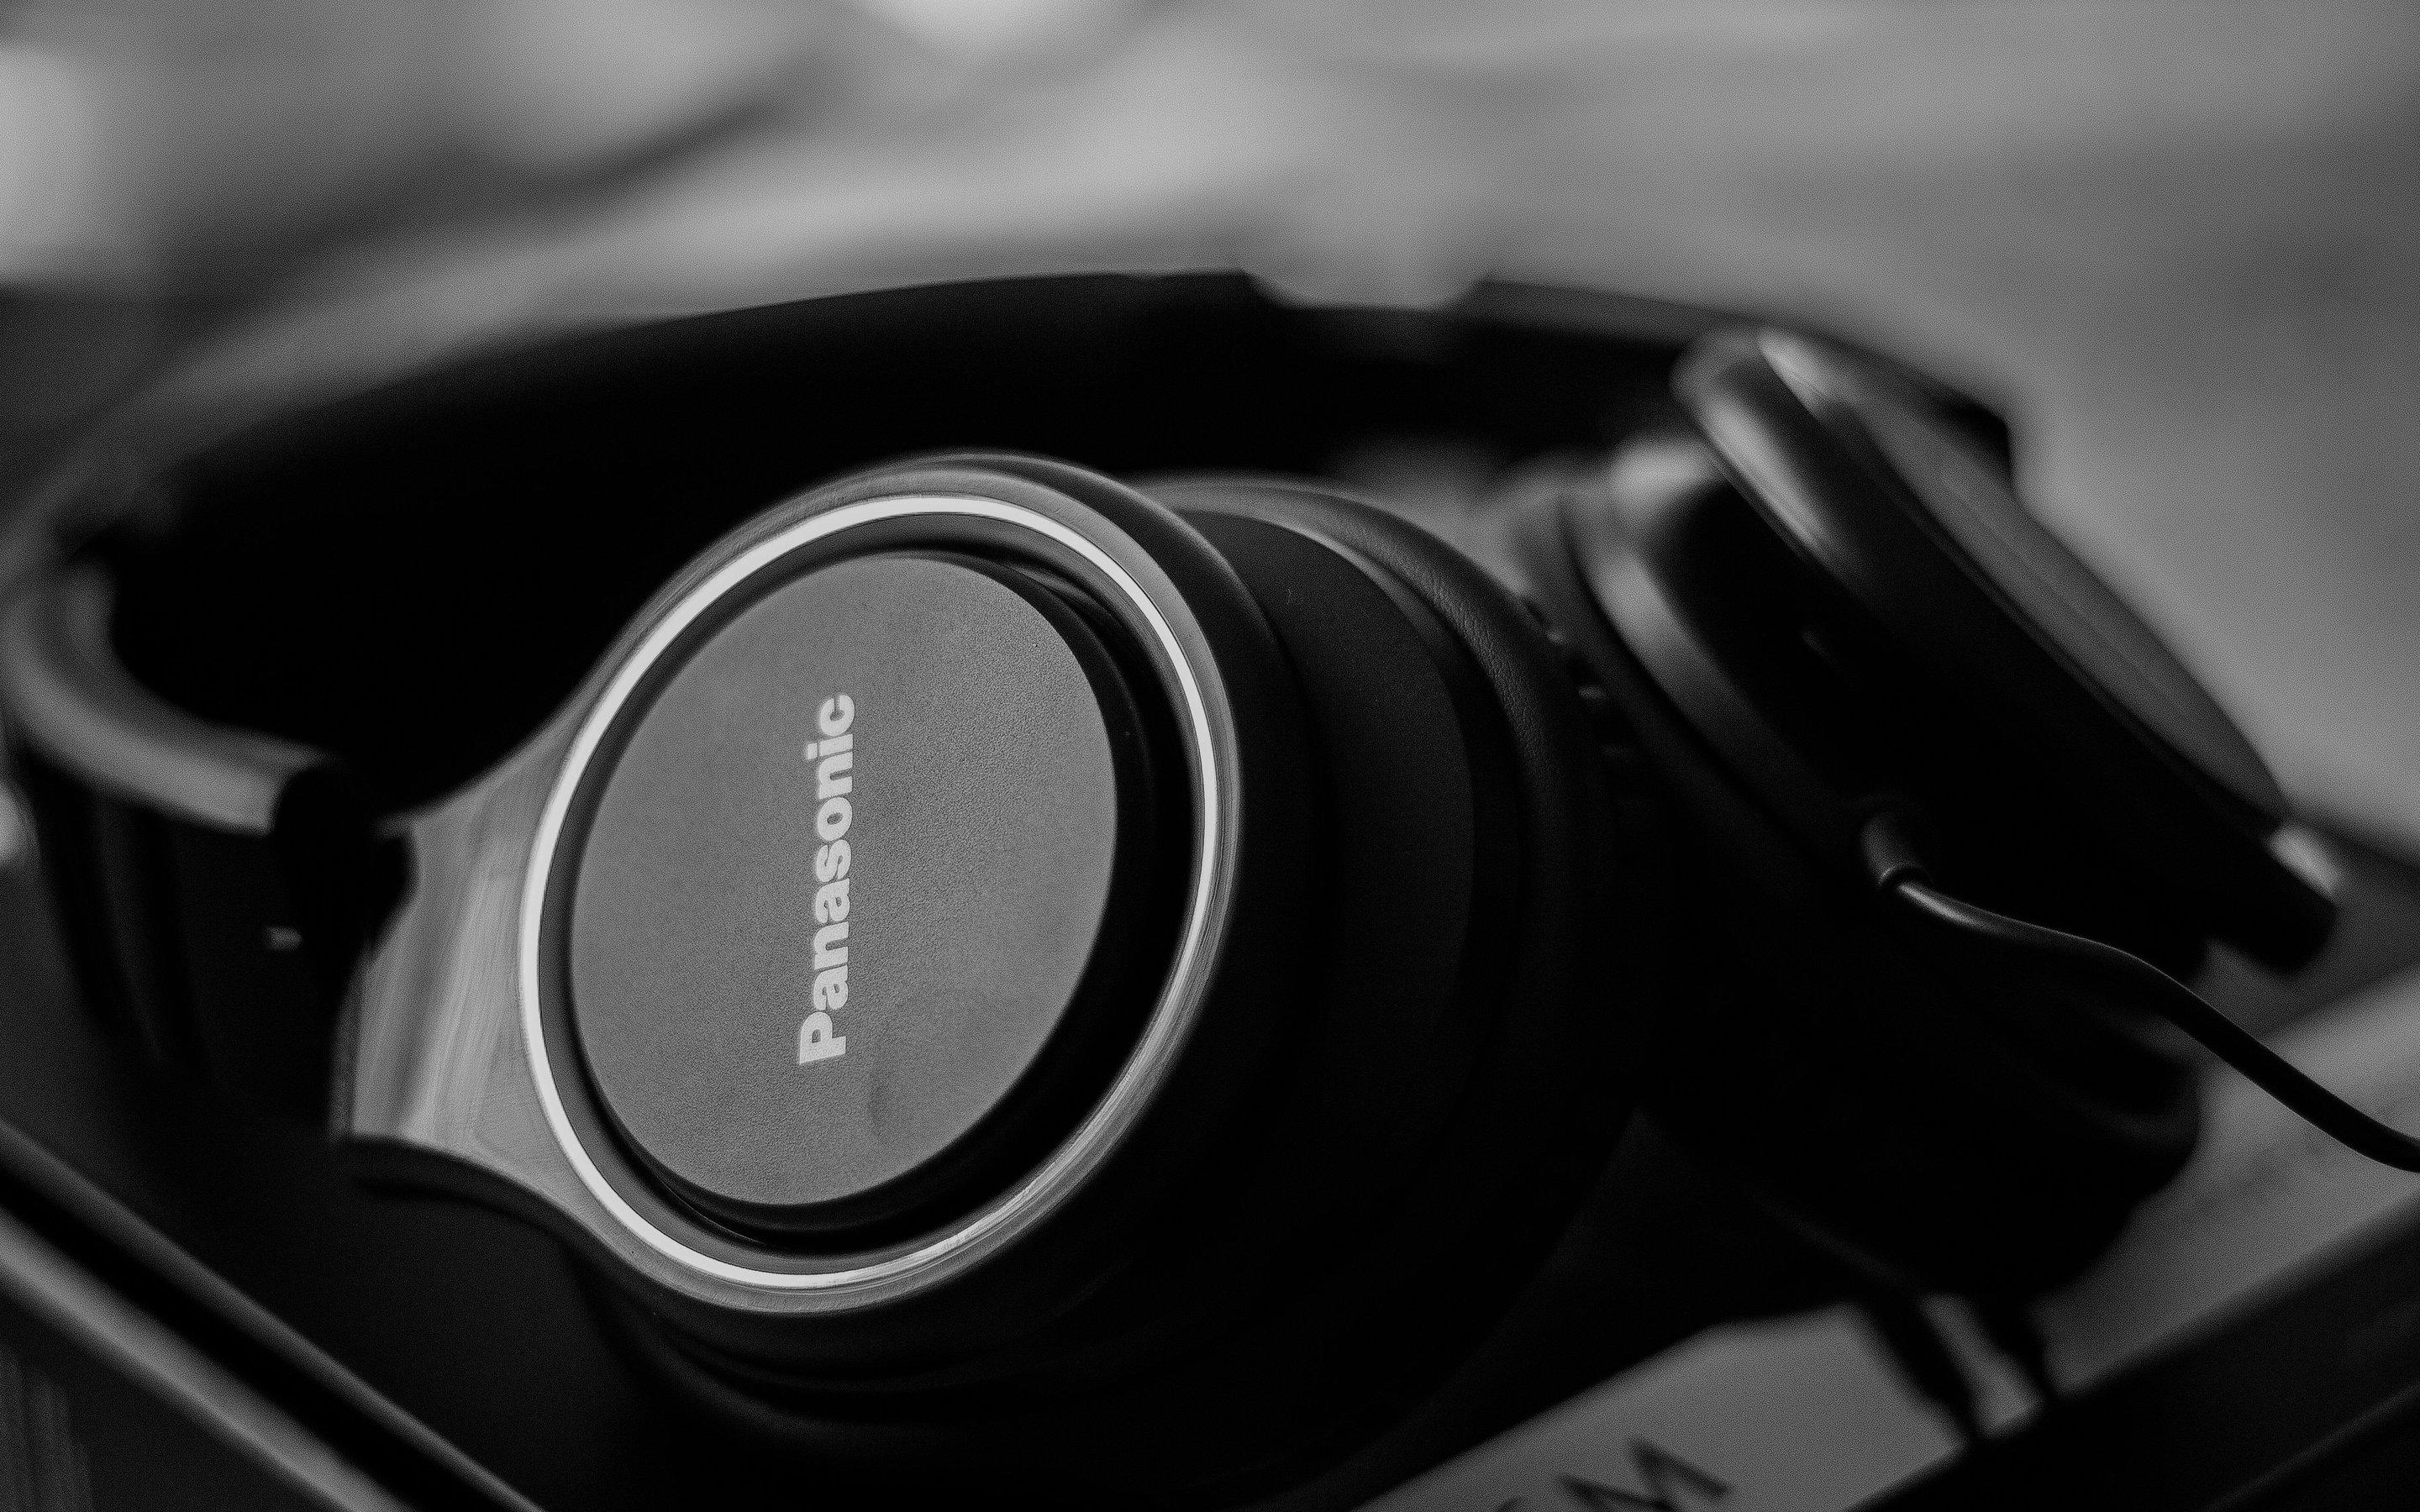 Download Blur Black and White Headset Audio with Panasonic